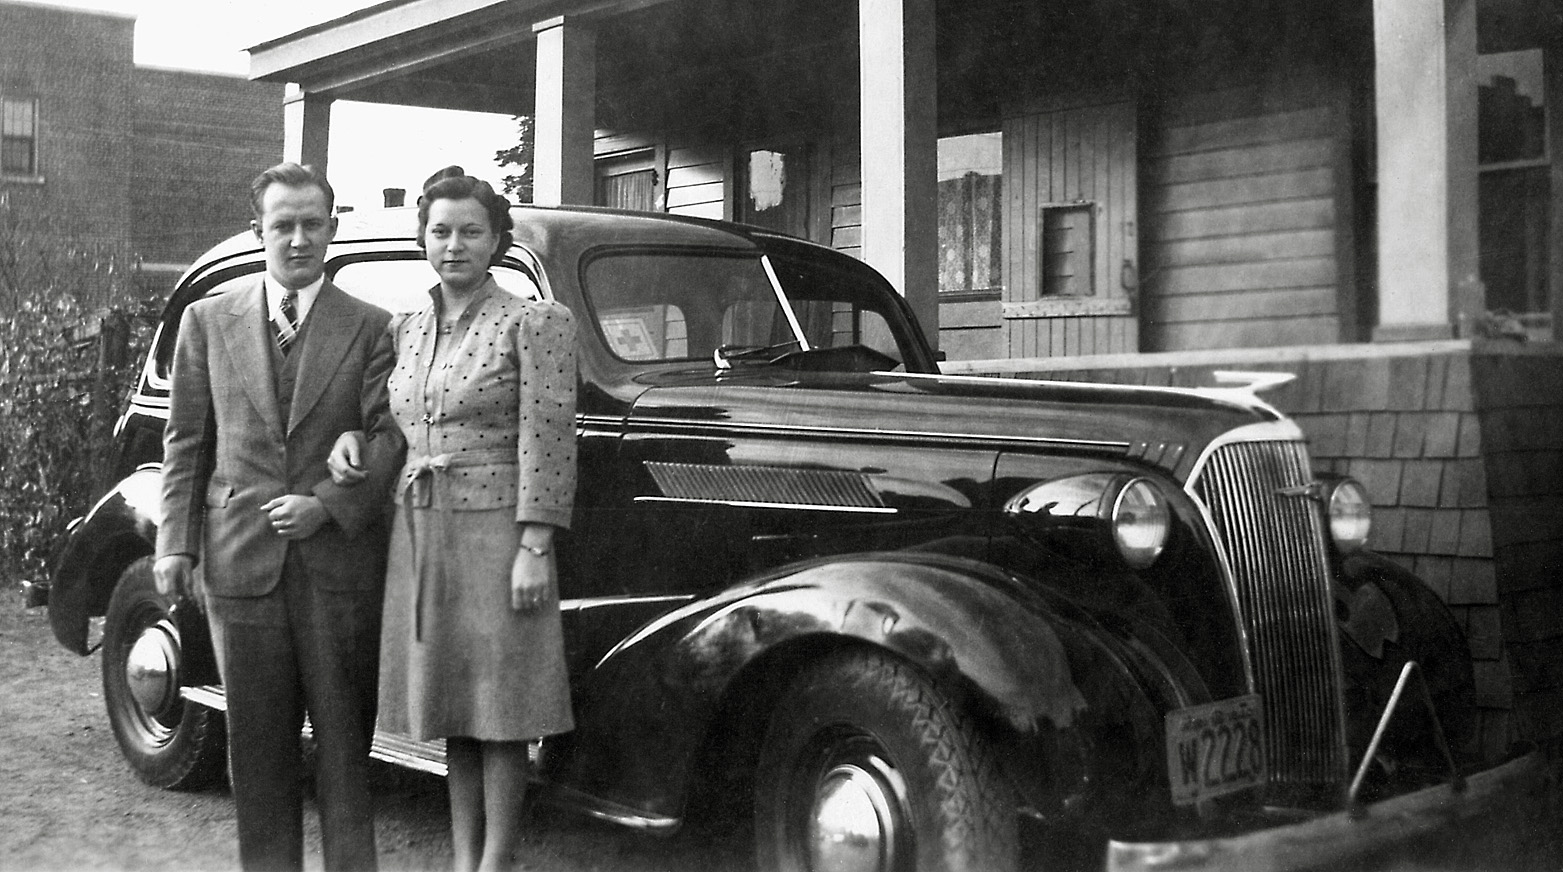 This is my mom and dad just after their marriage in 1941, taken at their close friends' home in Thorold, Ontario, located on a lane up a hill behind the post office on Main Street. Dad's first car which he had just purchased is that 1937 Chevy. View full size.